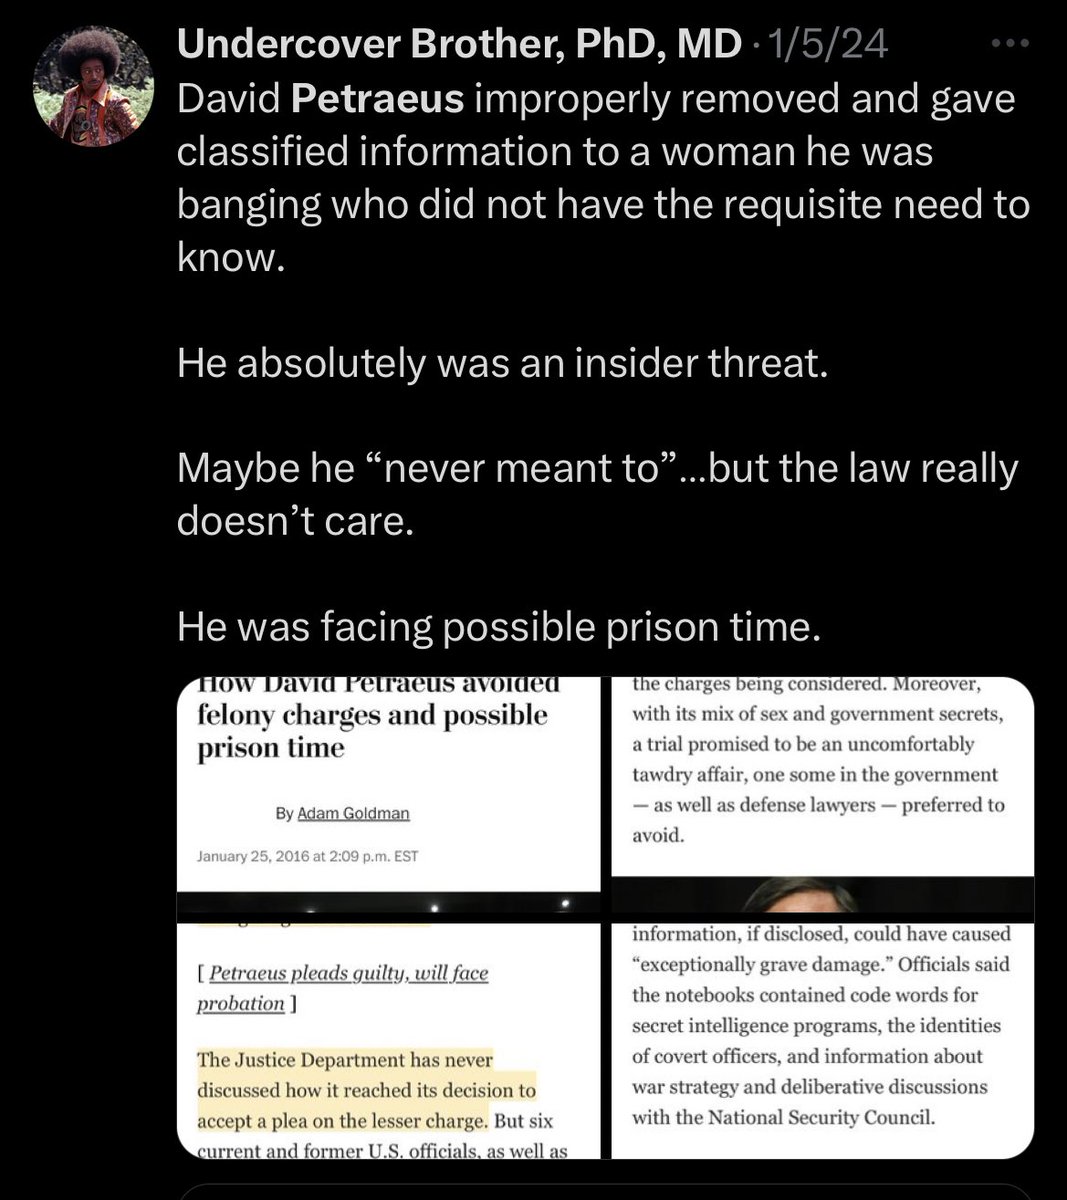 David Petraeus was facing prison time for giving documents to a woman he was cheating on his wife with.

People make mistakes, but West Point could try a little harder to find someone more exemplary to put in front of cadets.  

Sends the wrong message.

x.com/realucbfosho/s…